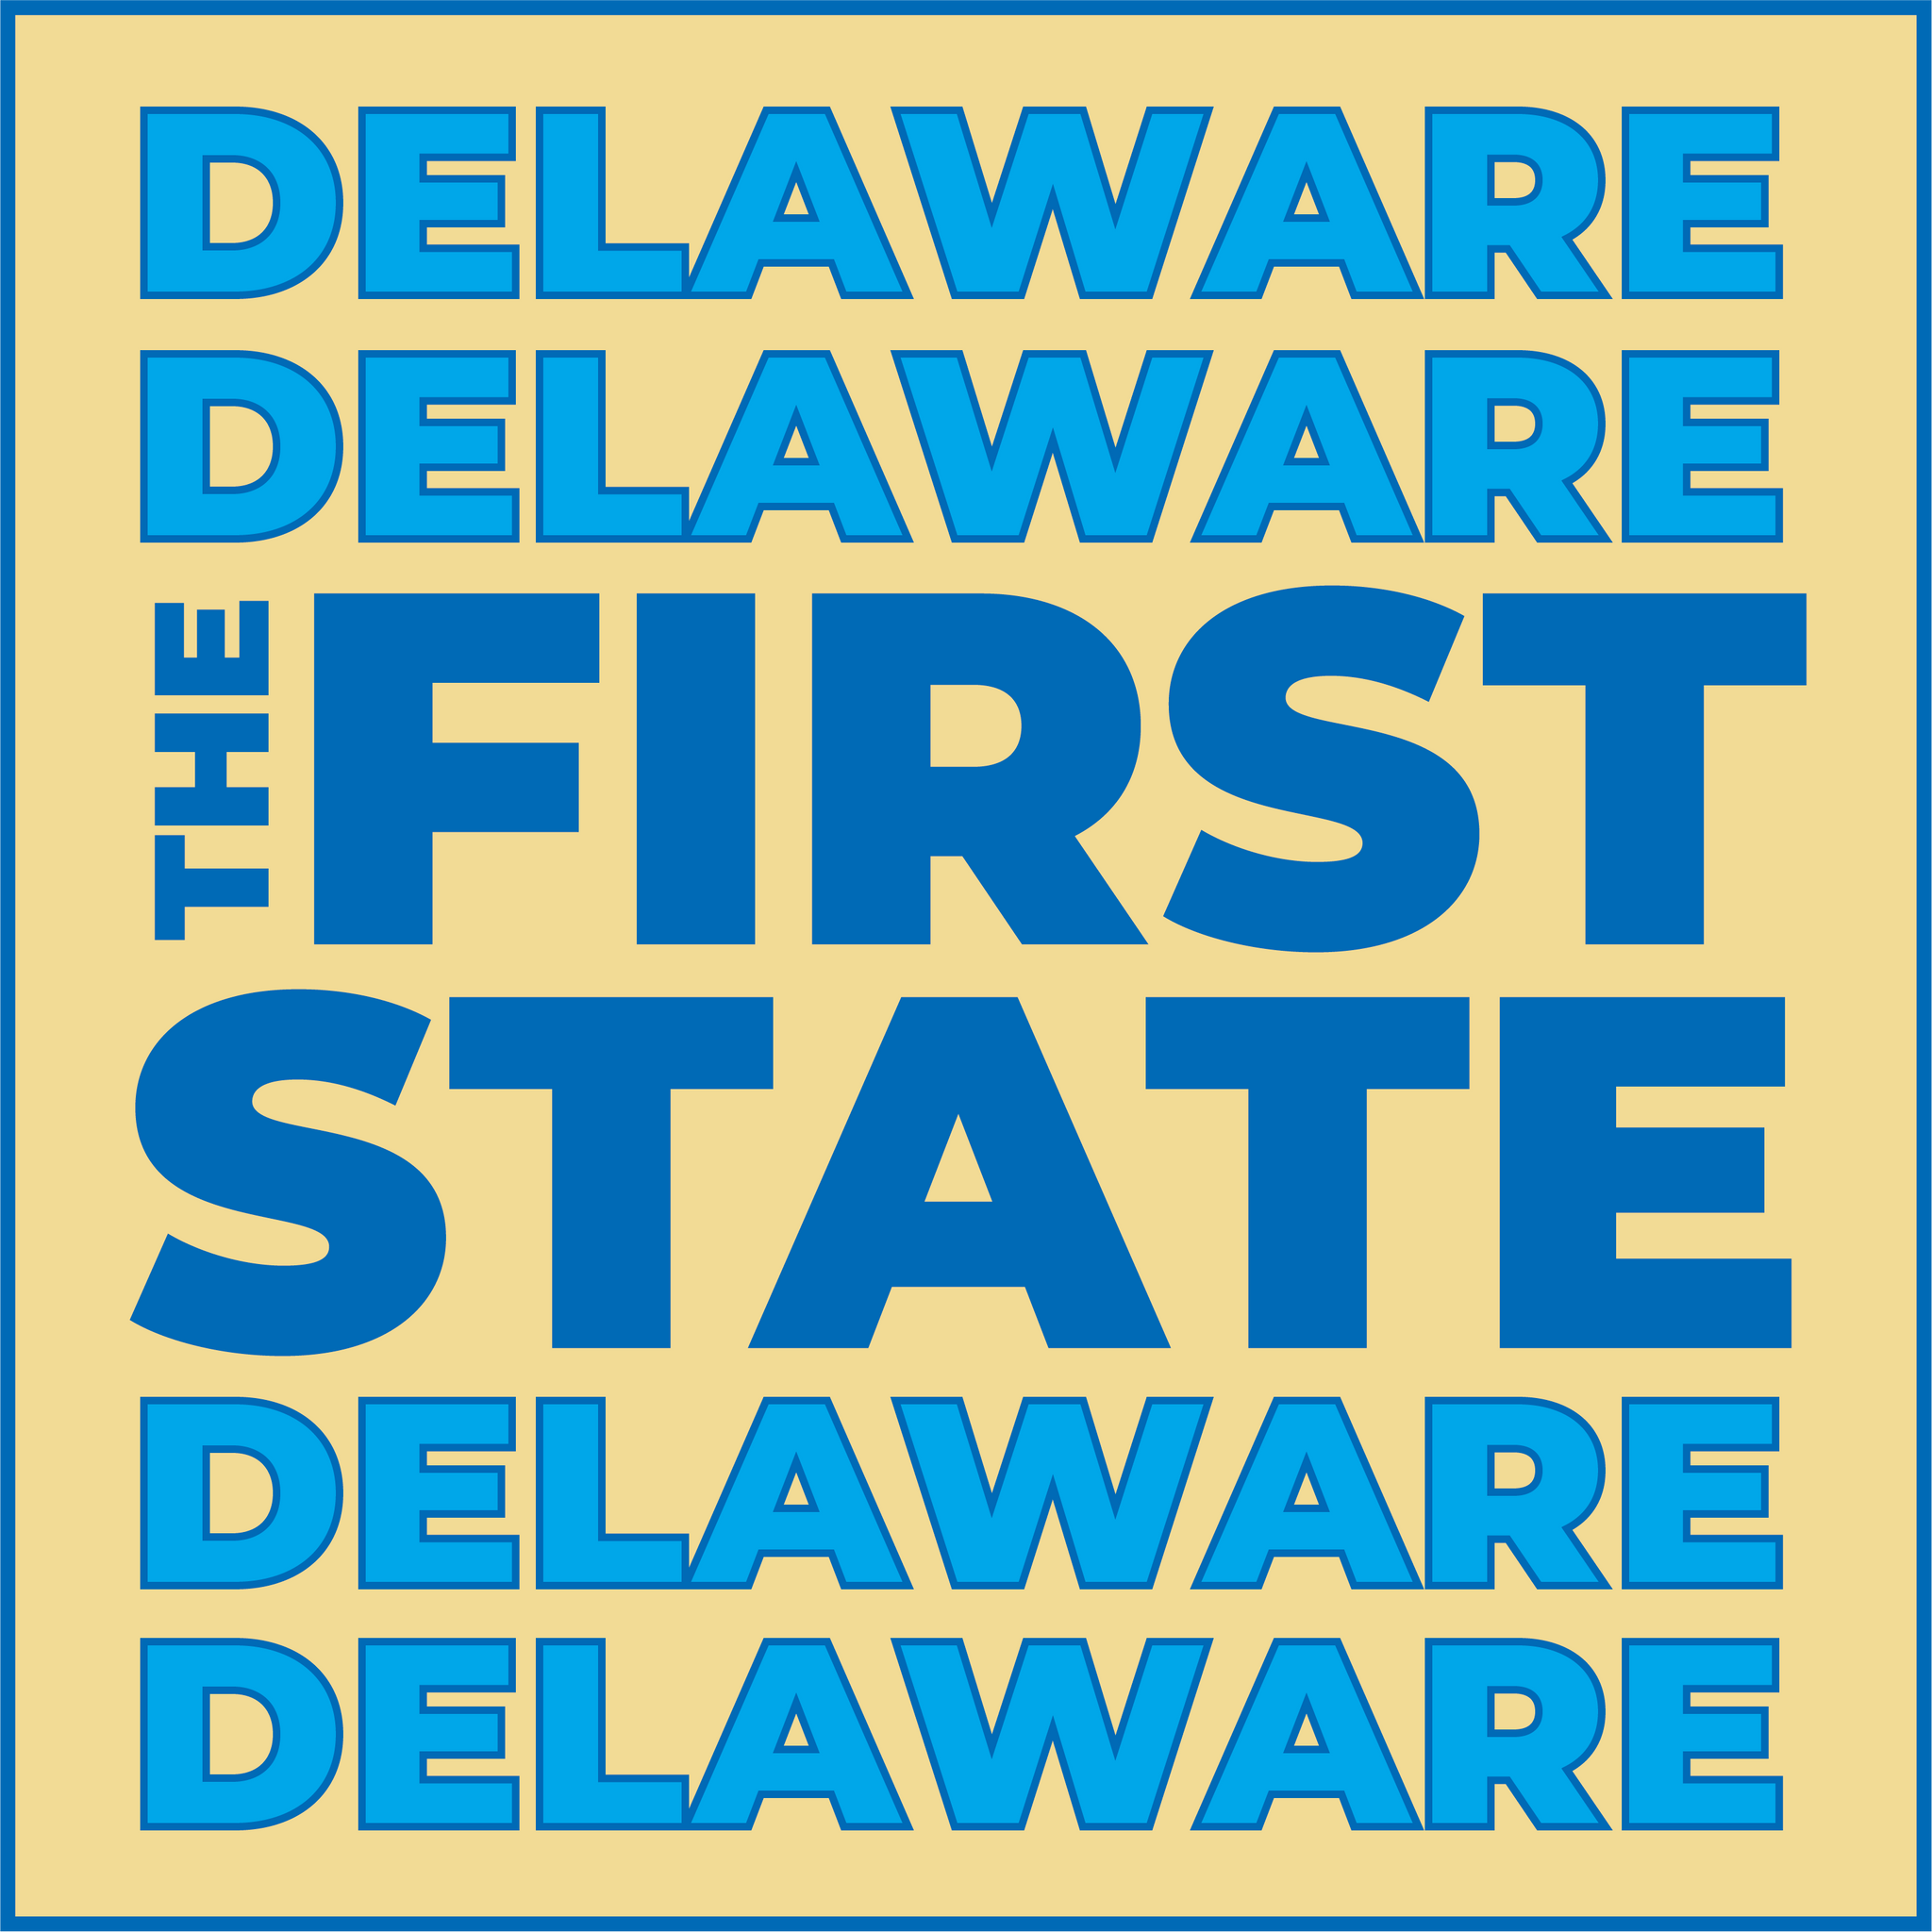 DELAWARE, "The First State"